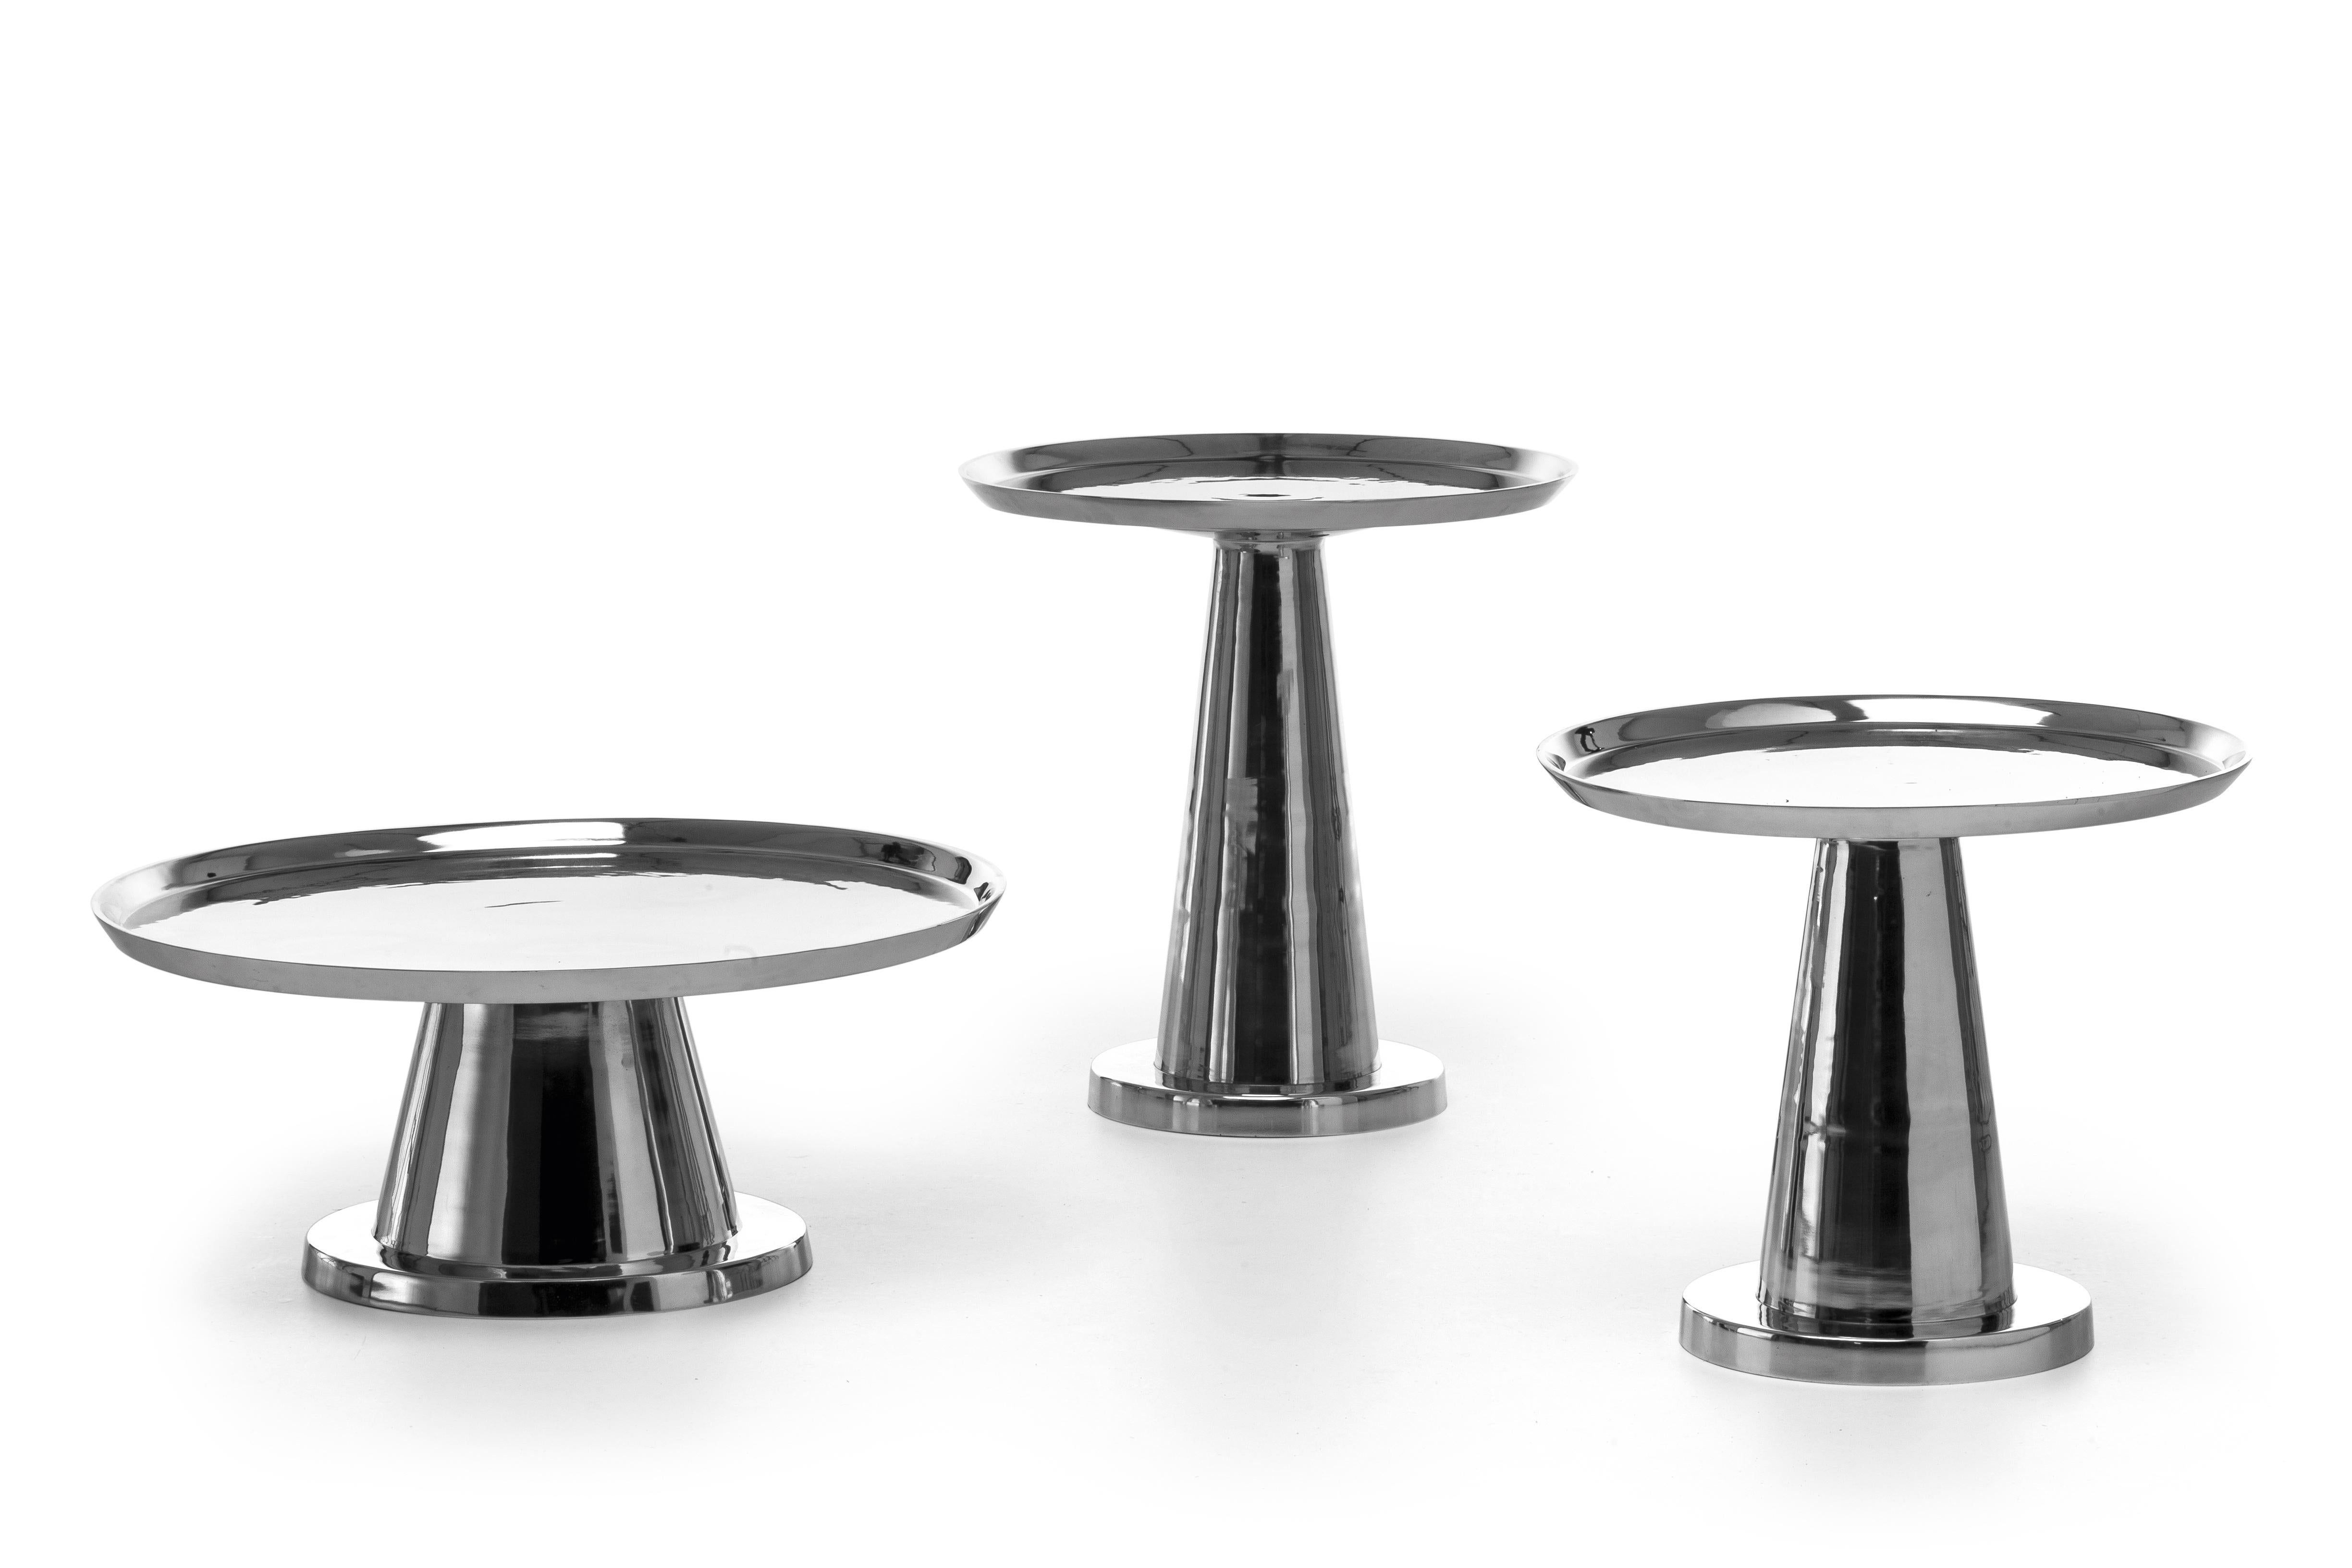 Contrasts of light and reflections characterise the Next 141/142/144 coffee table family. Made entirely of polished cast aluminium, they are available in different sizes and heights and are characterised by a single central base that seems to